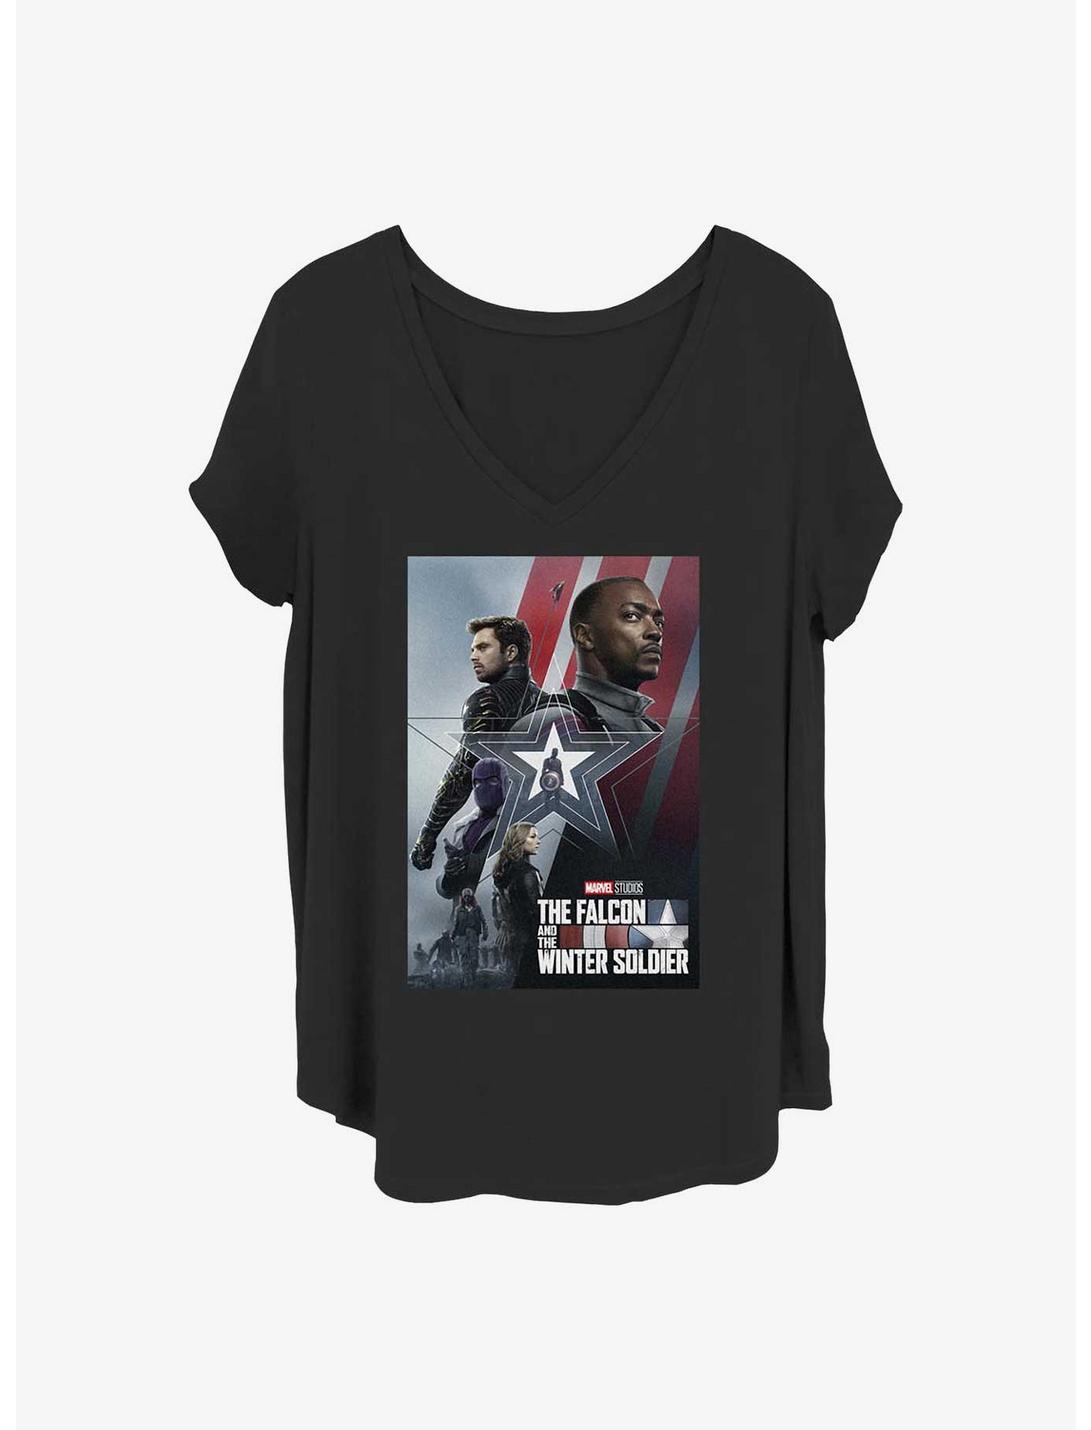 Marvel The Falcon and the Winter Soldier Partners Girls T-Shirt Plus Size, BLACK, hi-res